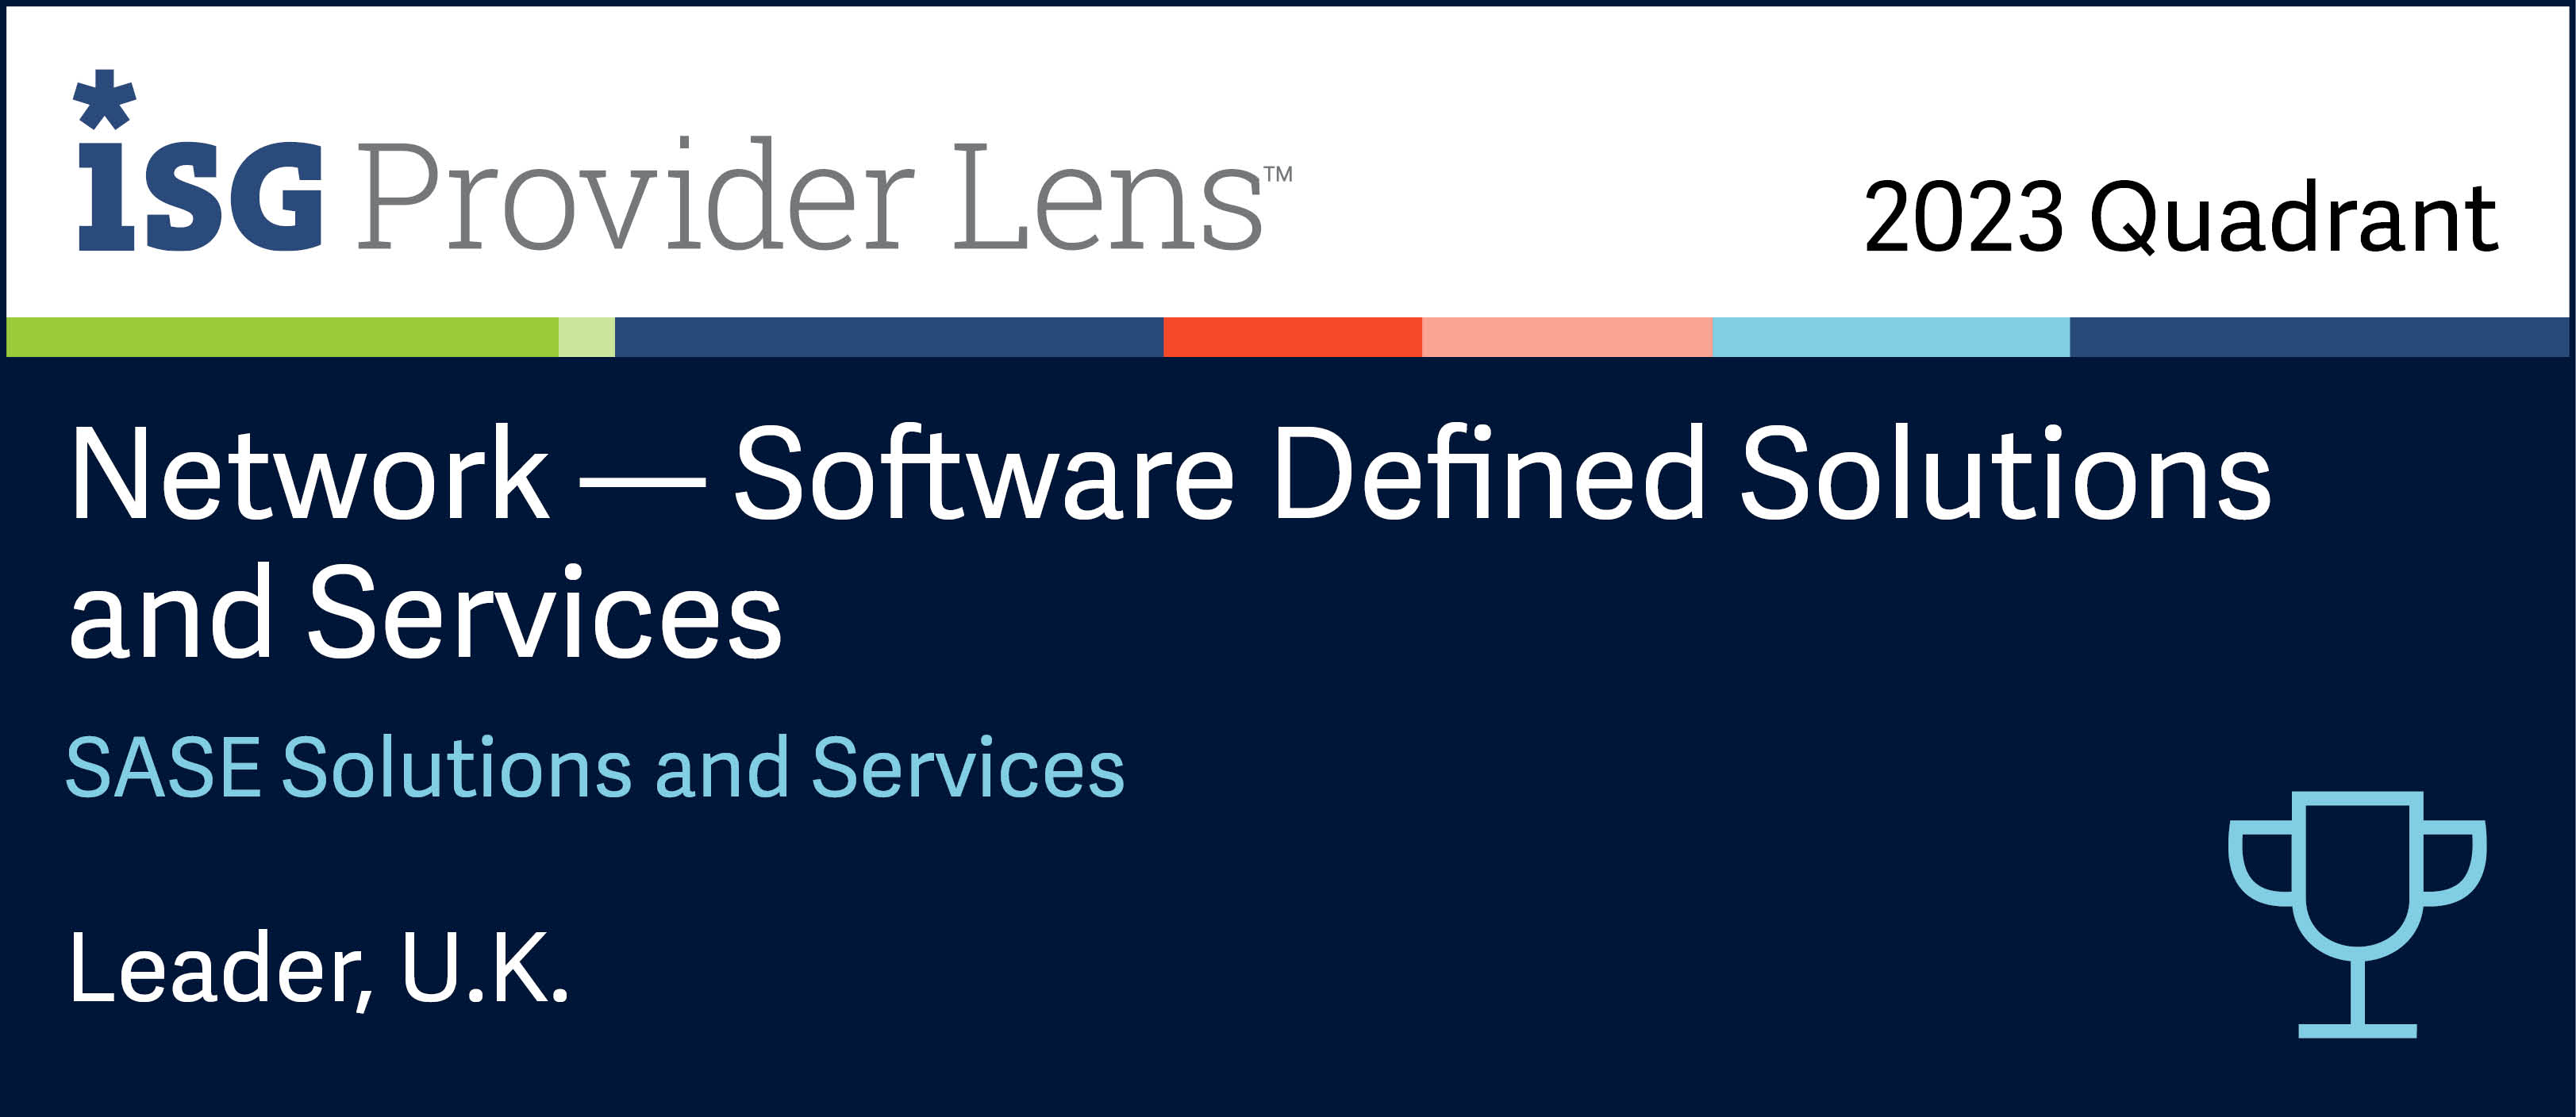 HCLTech positioned as a Leader in ISG Provider Lens™ Network – Software Defined Solutions and Services – SASE Solutions and Services – UK 2023